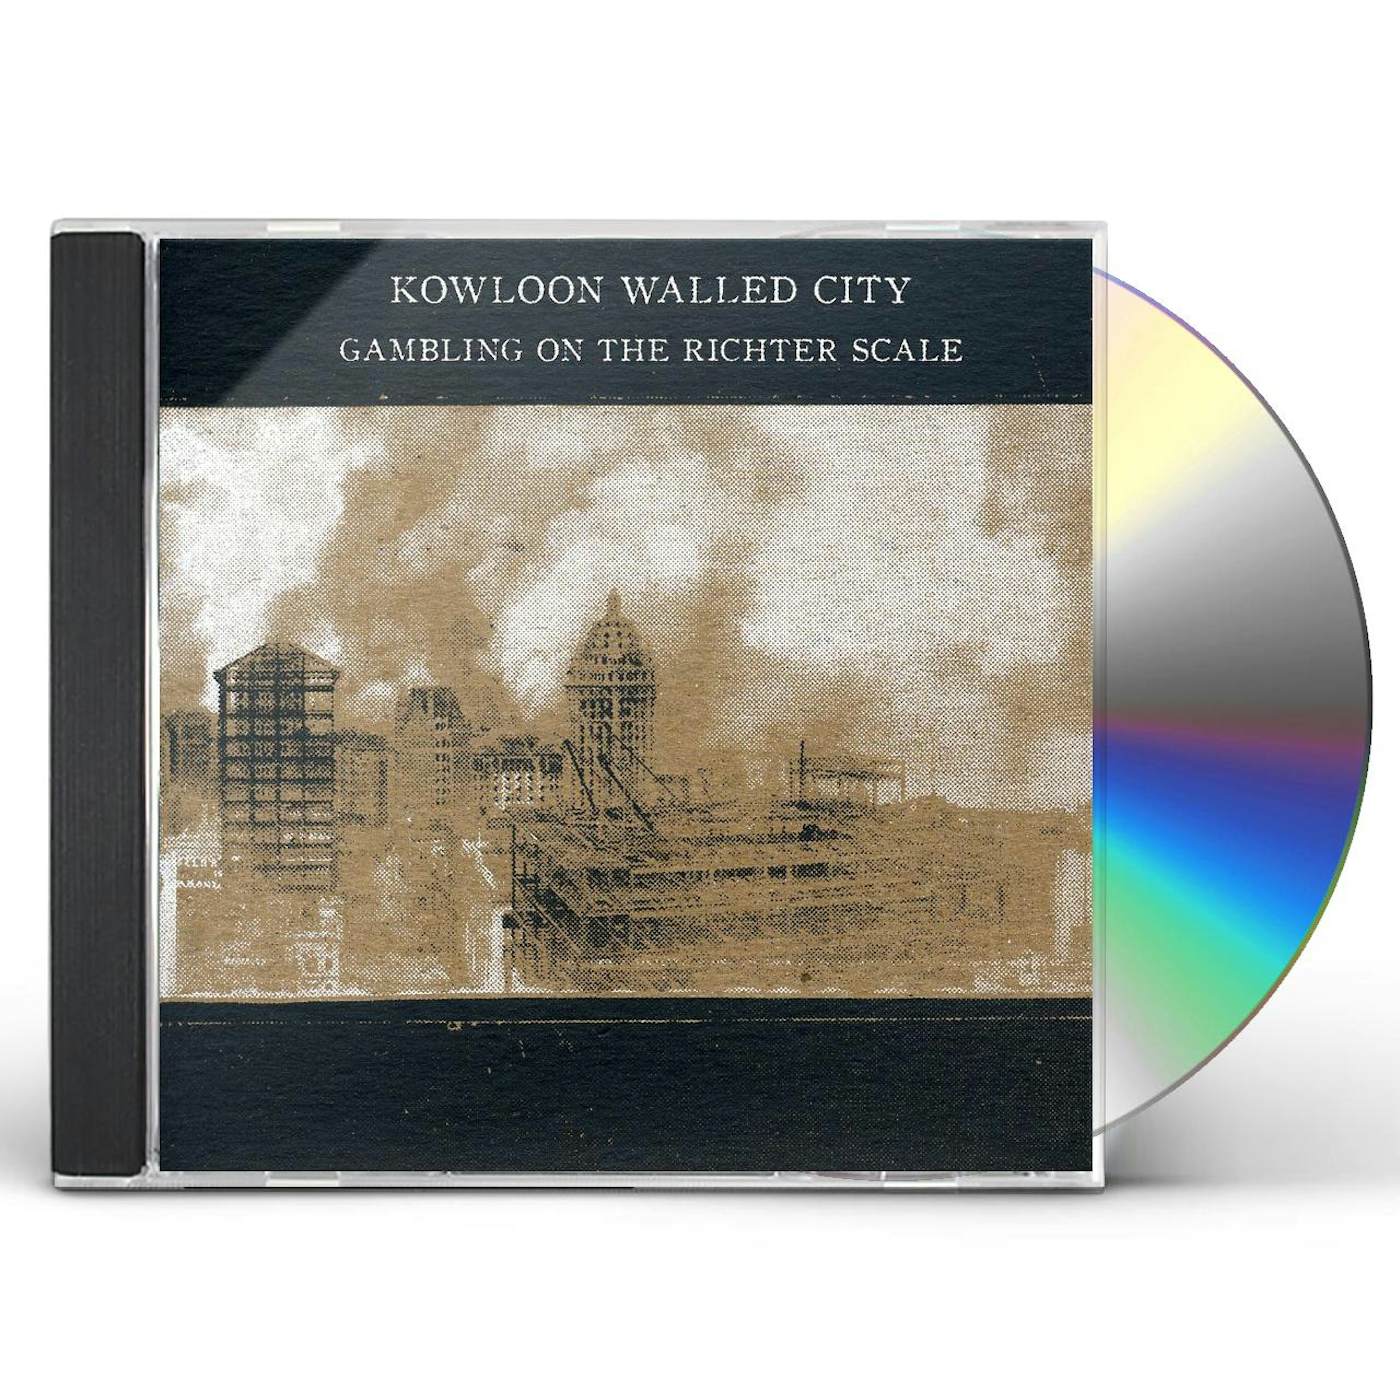 Kowloon Walled City GAMBLING ON RICHTER SCALE CD